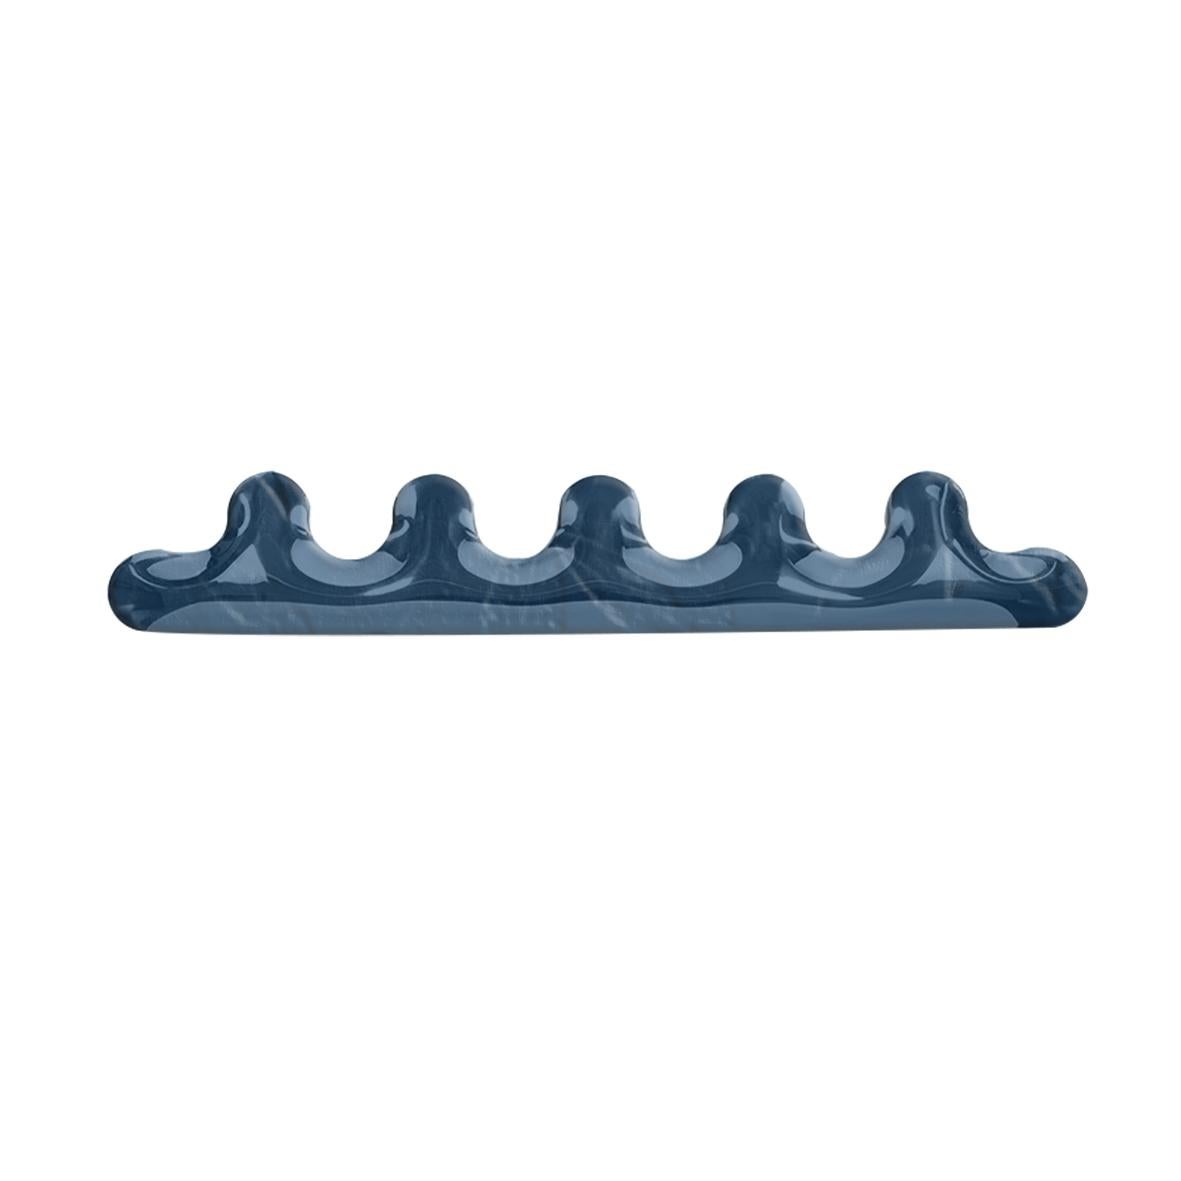 Cosmic Blue Kamm 5 coat hanger by Zieta
Dimensions: D 6 x W 77 x H 13 cm 
Material: Stainless steel. 
Finish: Thermal colored.
Available in colors: Beige Grey, Black Glossy, Graphite, Stainless Steel, White Glossy, Flamed Gold, and Cosmic Blue. Also